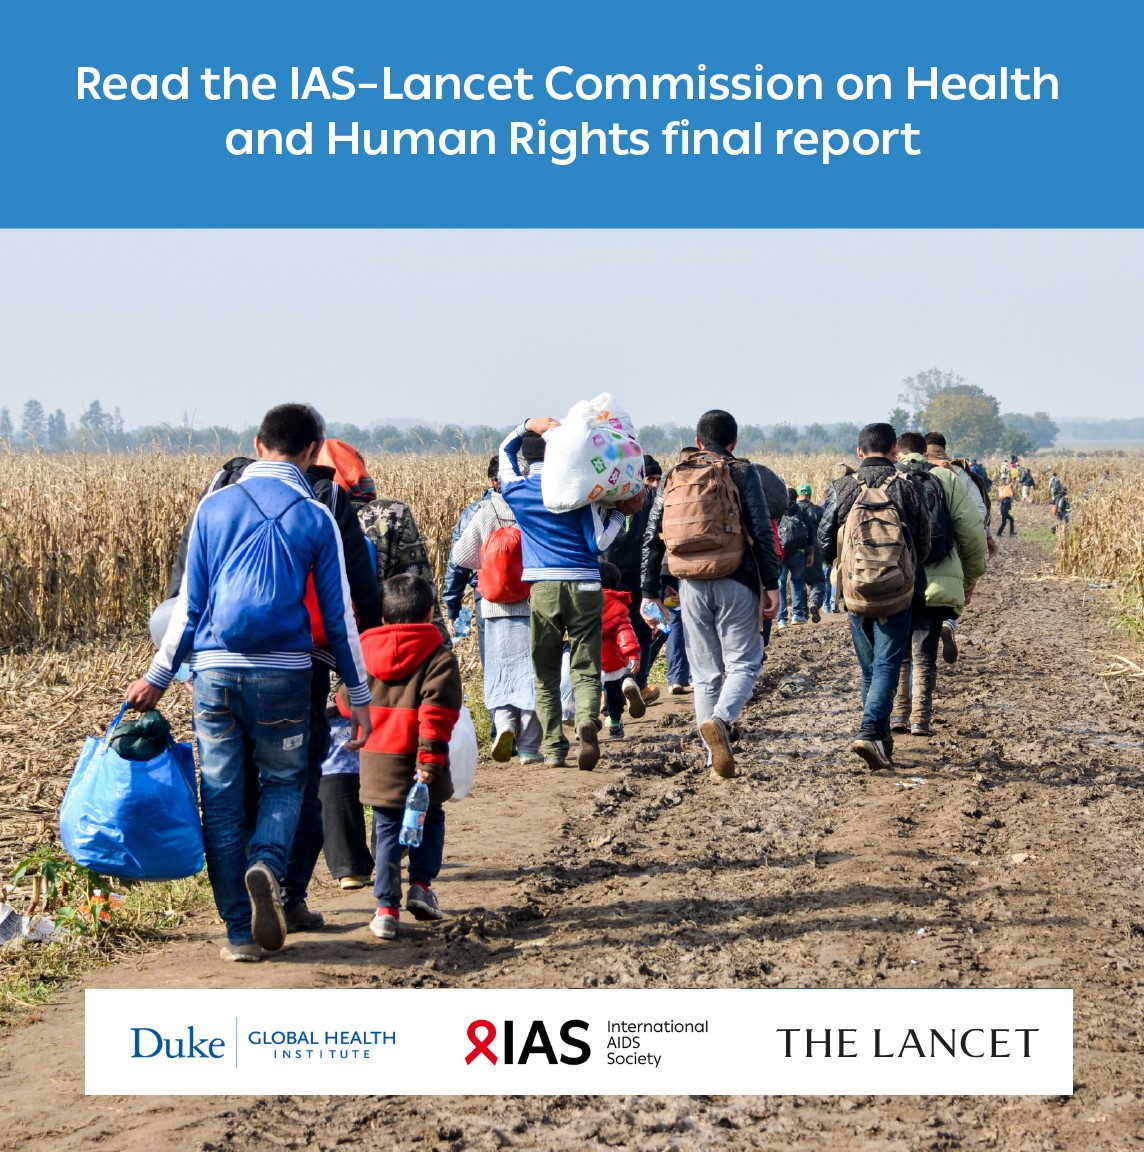 📰The IAS–Lancet Commission on Health & Human Rights final report is out! It examines the decline in the upholding of human rights worldwide & the implications for health. 🌍Read the report & discover how we can refocus our commitment to human rights! thelancet.com/journals/lance…